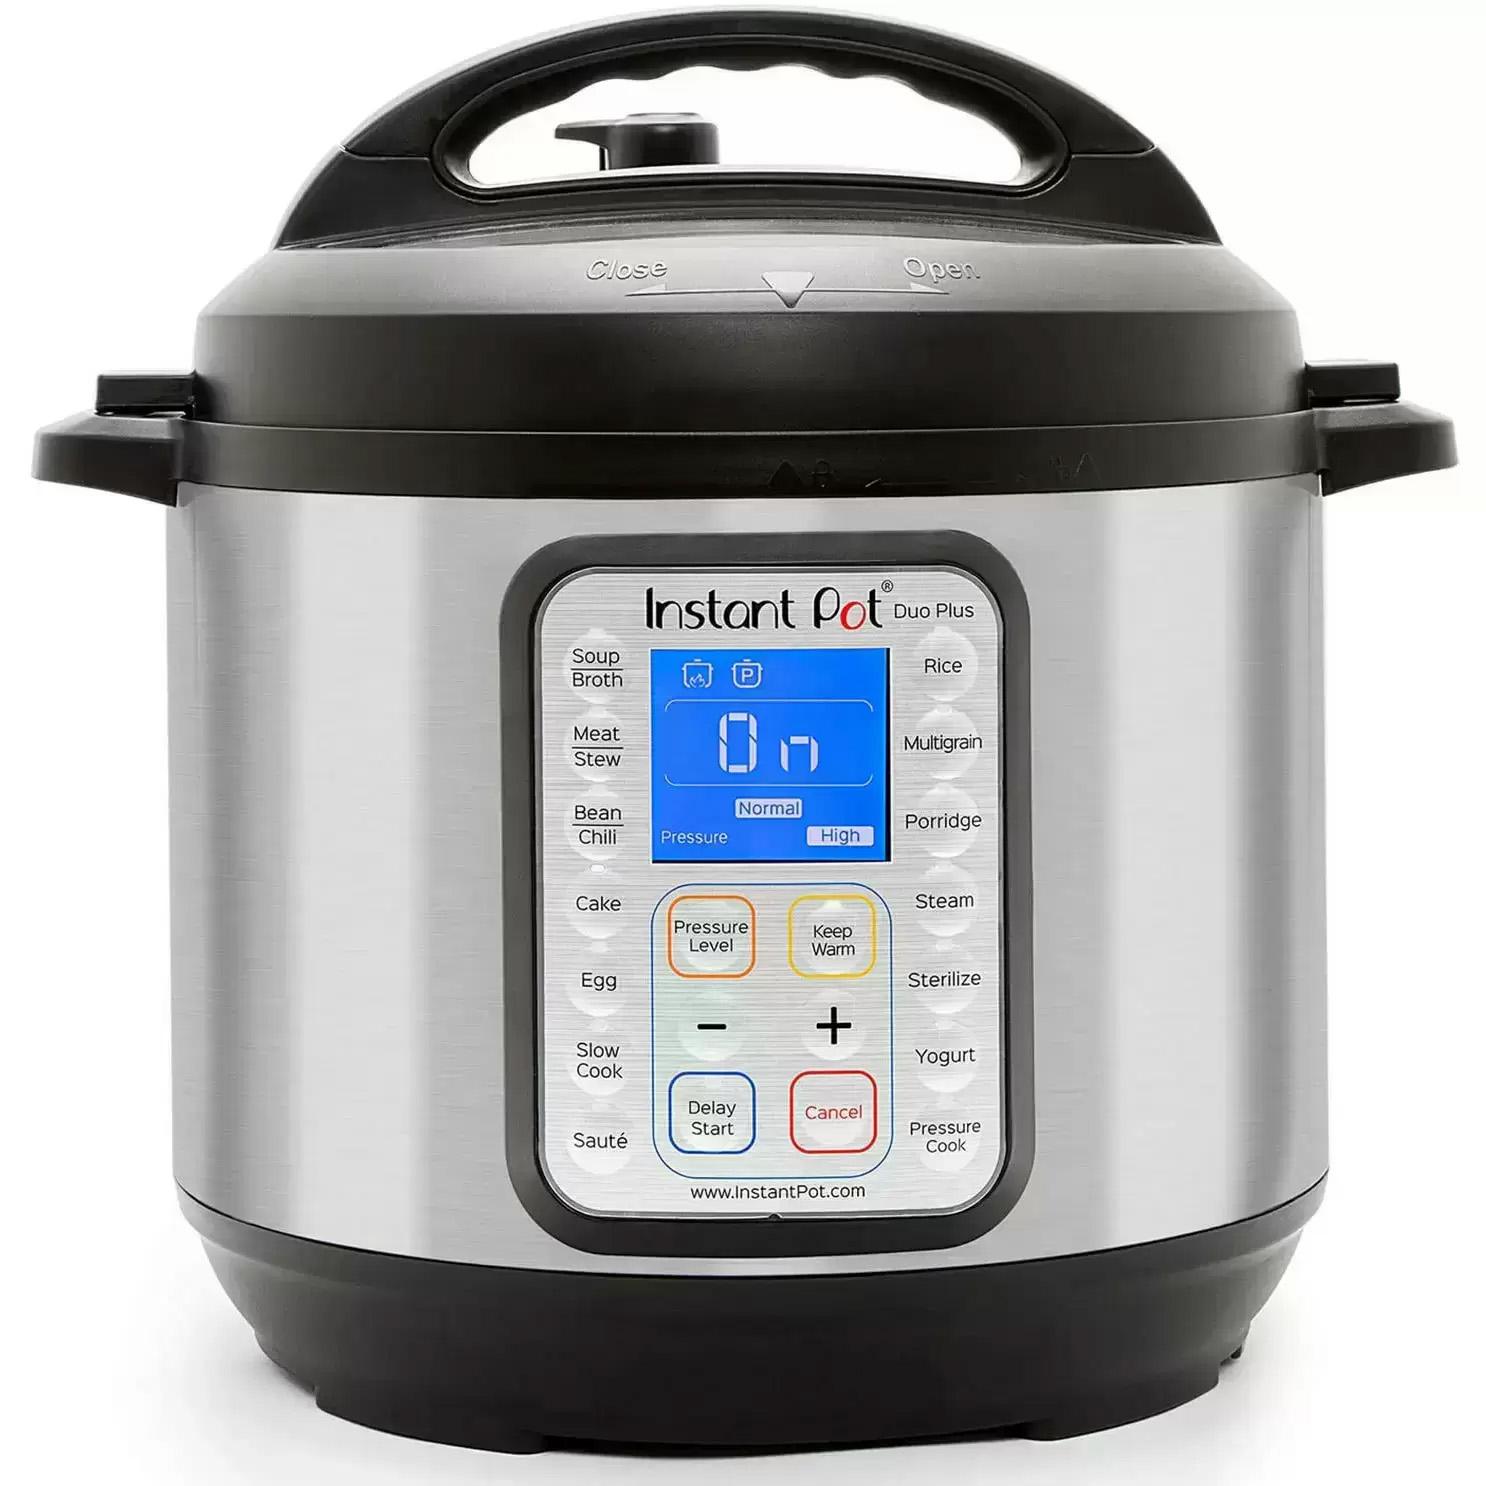 Instant Pot Duo Plus 9-in-1 Electric Pressure Cooker for $97.99 Shipped